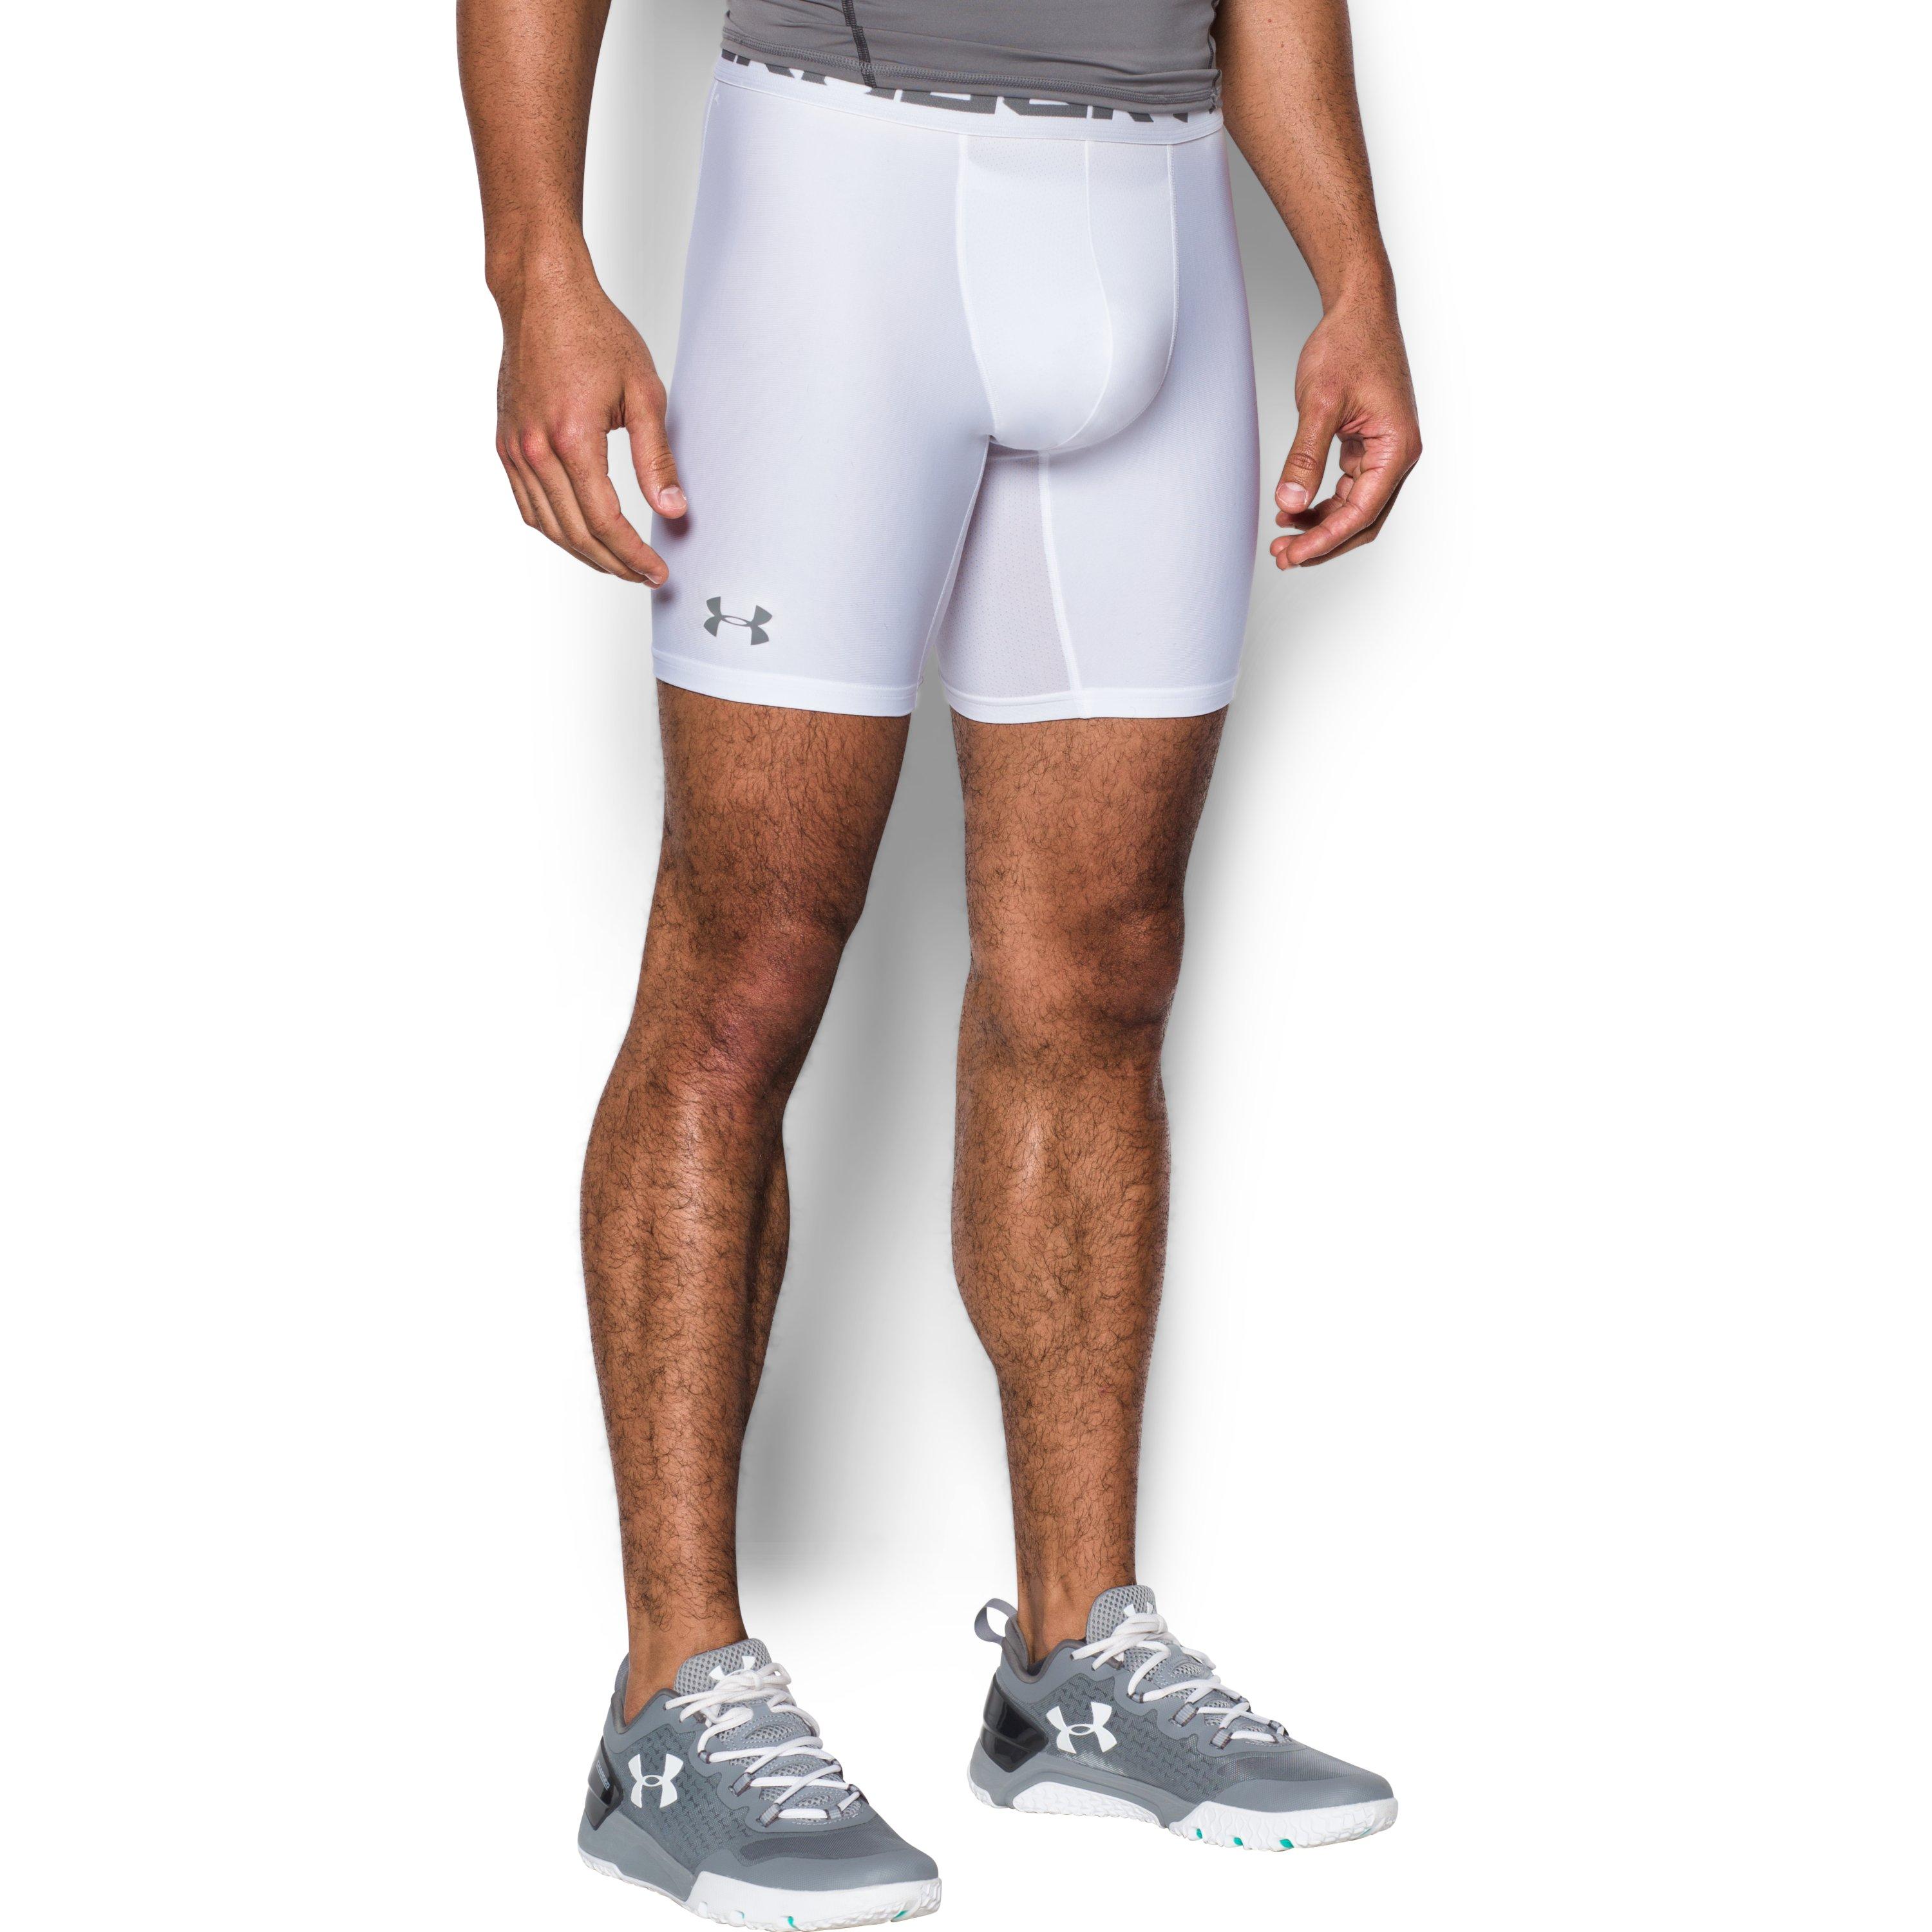 Under armour Men's Heatgear® Armour Compression Shorts W/ Cup in White ...